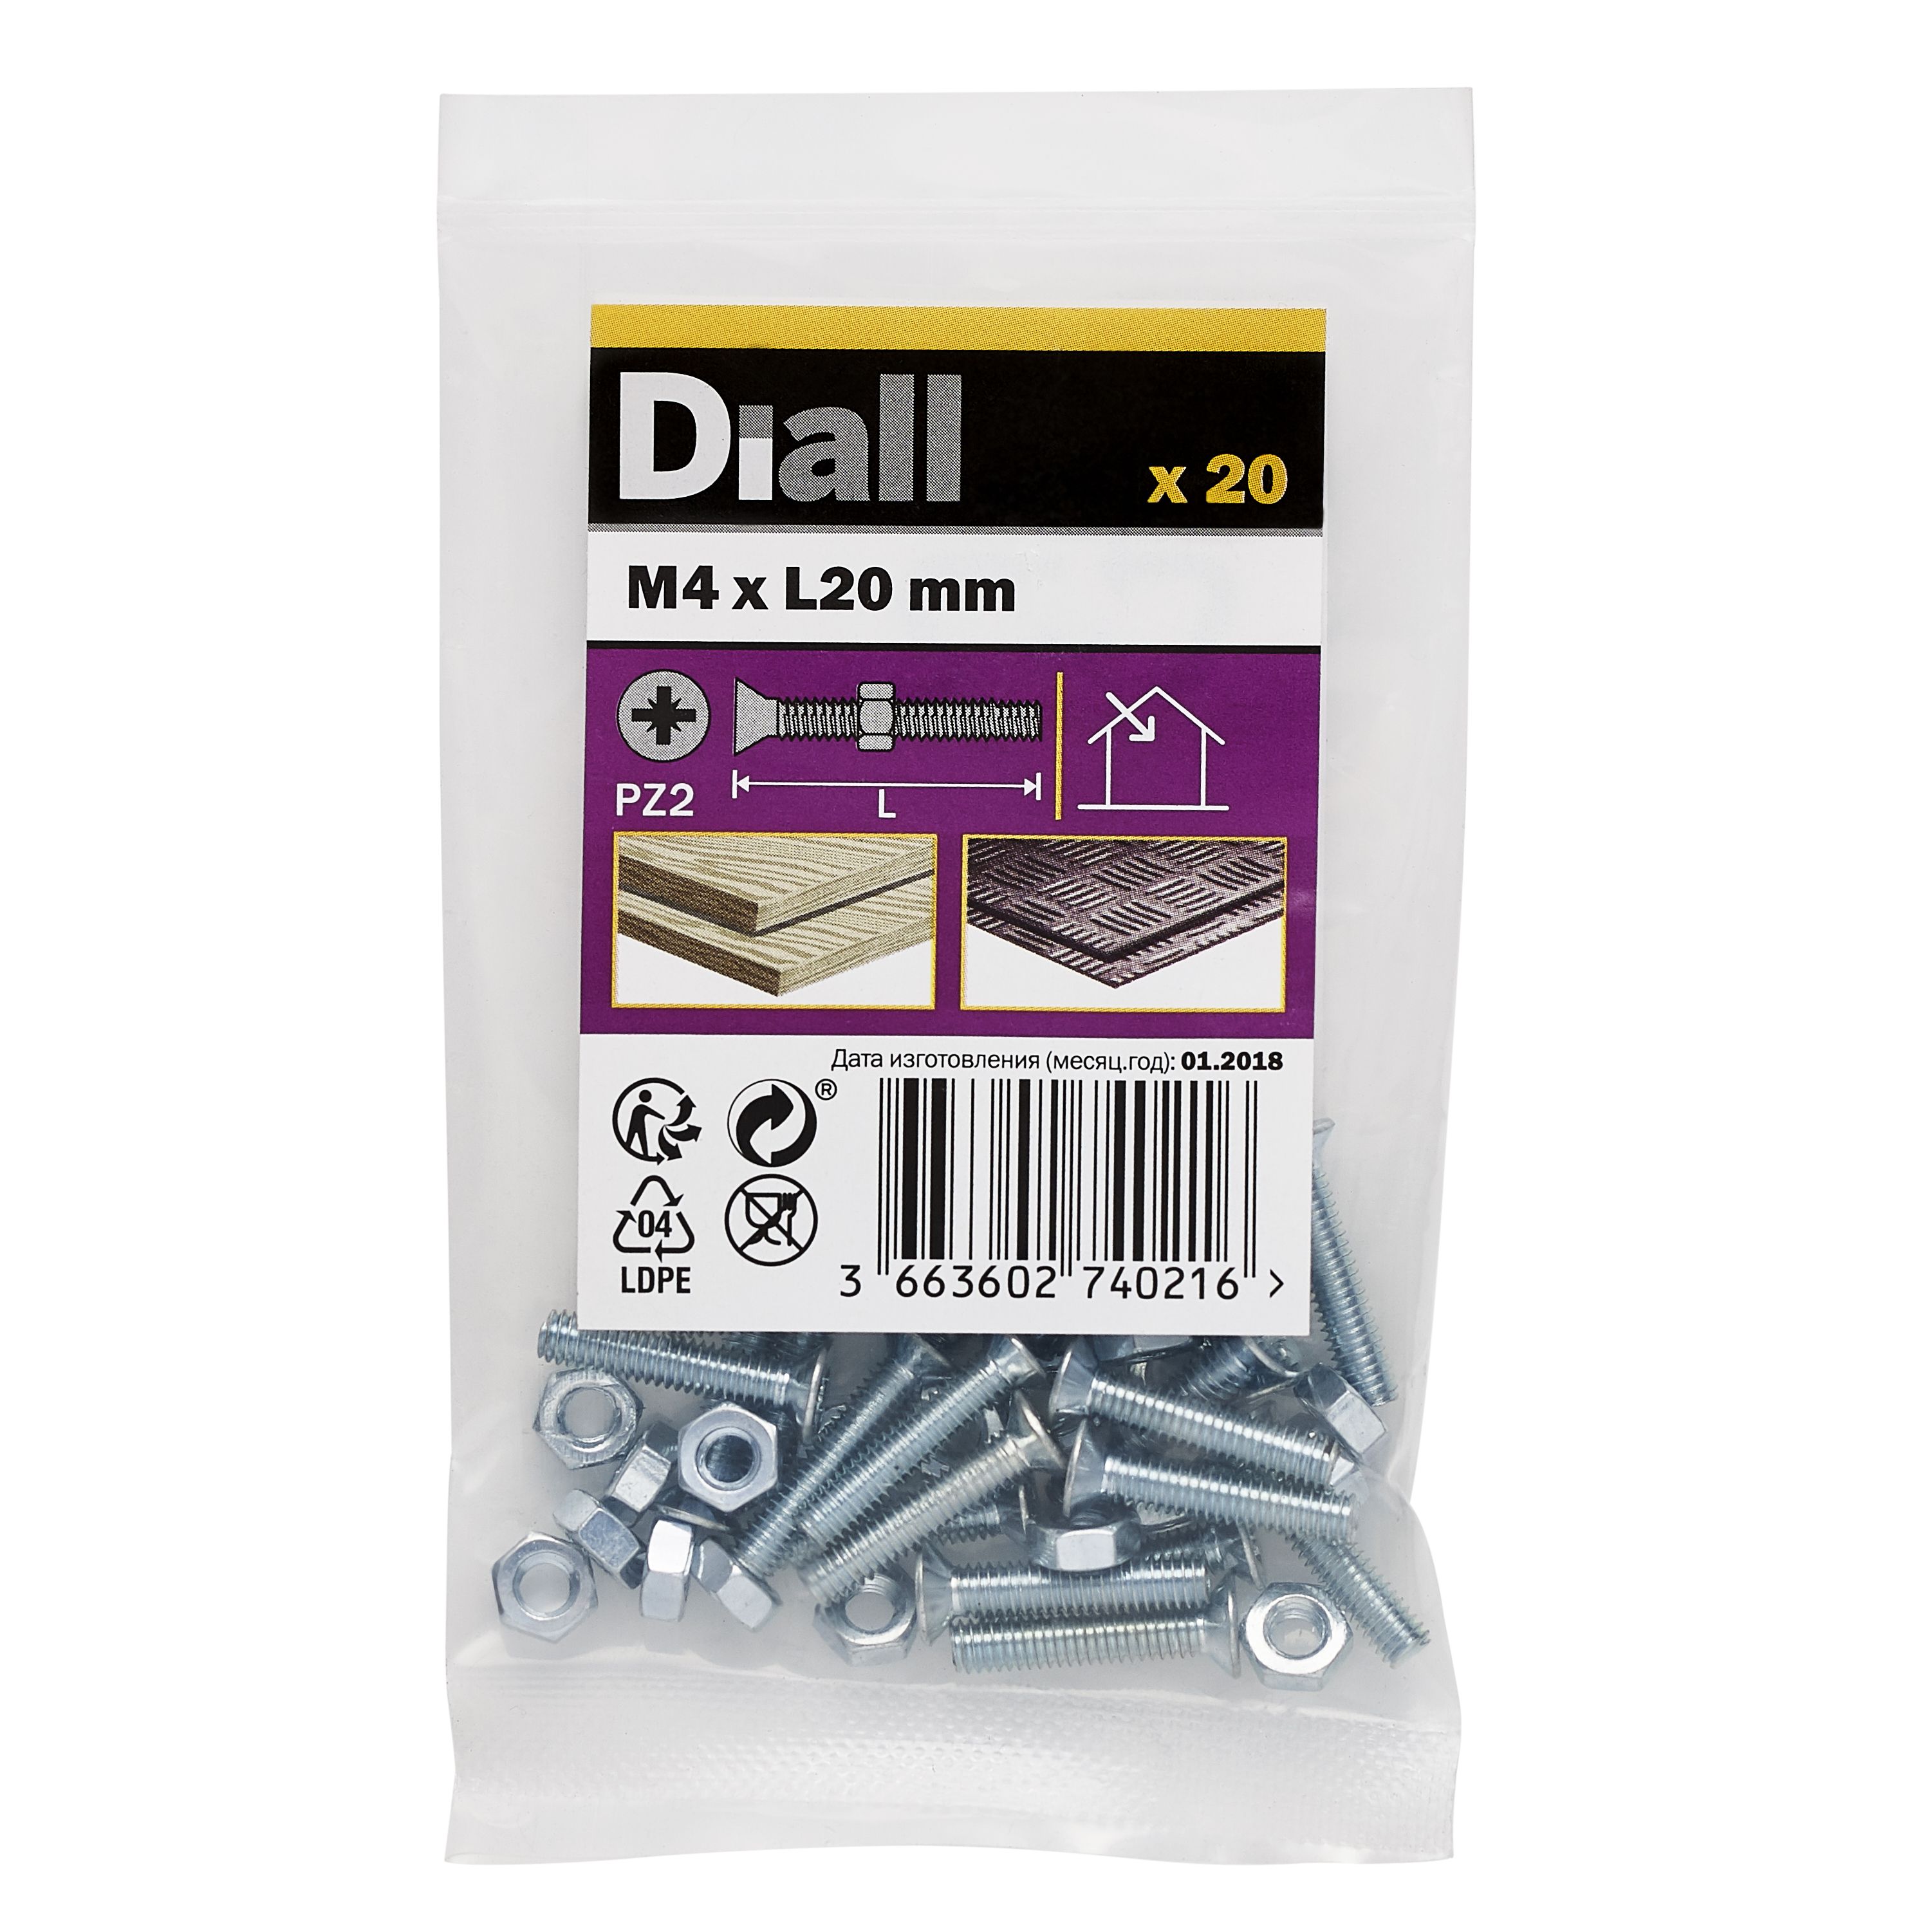 Diall M4 Cruciform Philips Pan head Zinc-plated Carbon steel Machine screw & nut (Dia)4mm (L)20mm, Pack of 20